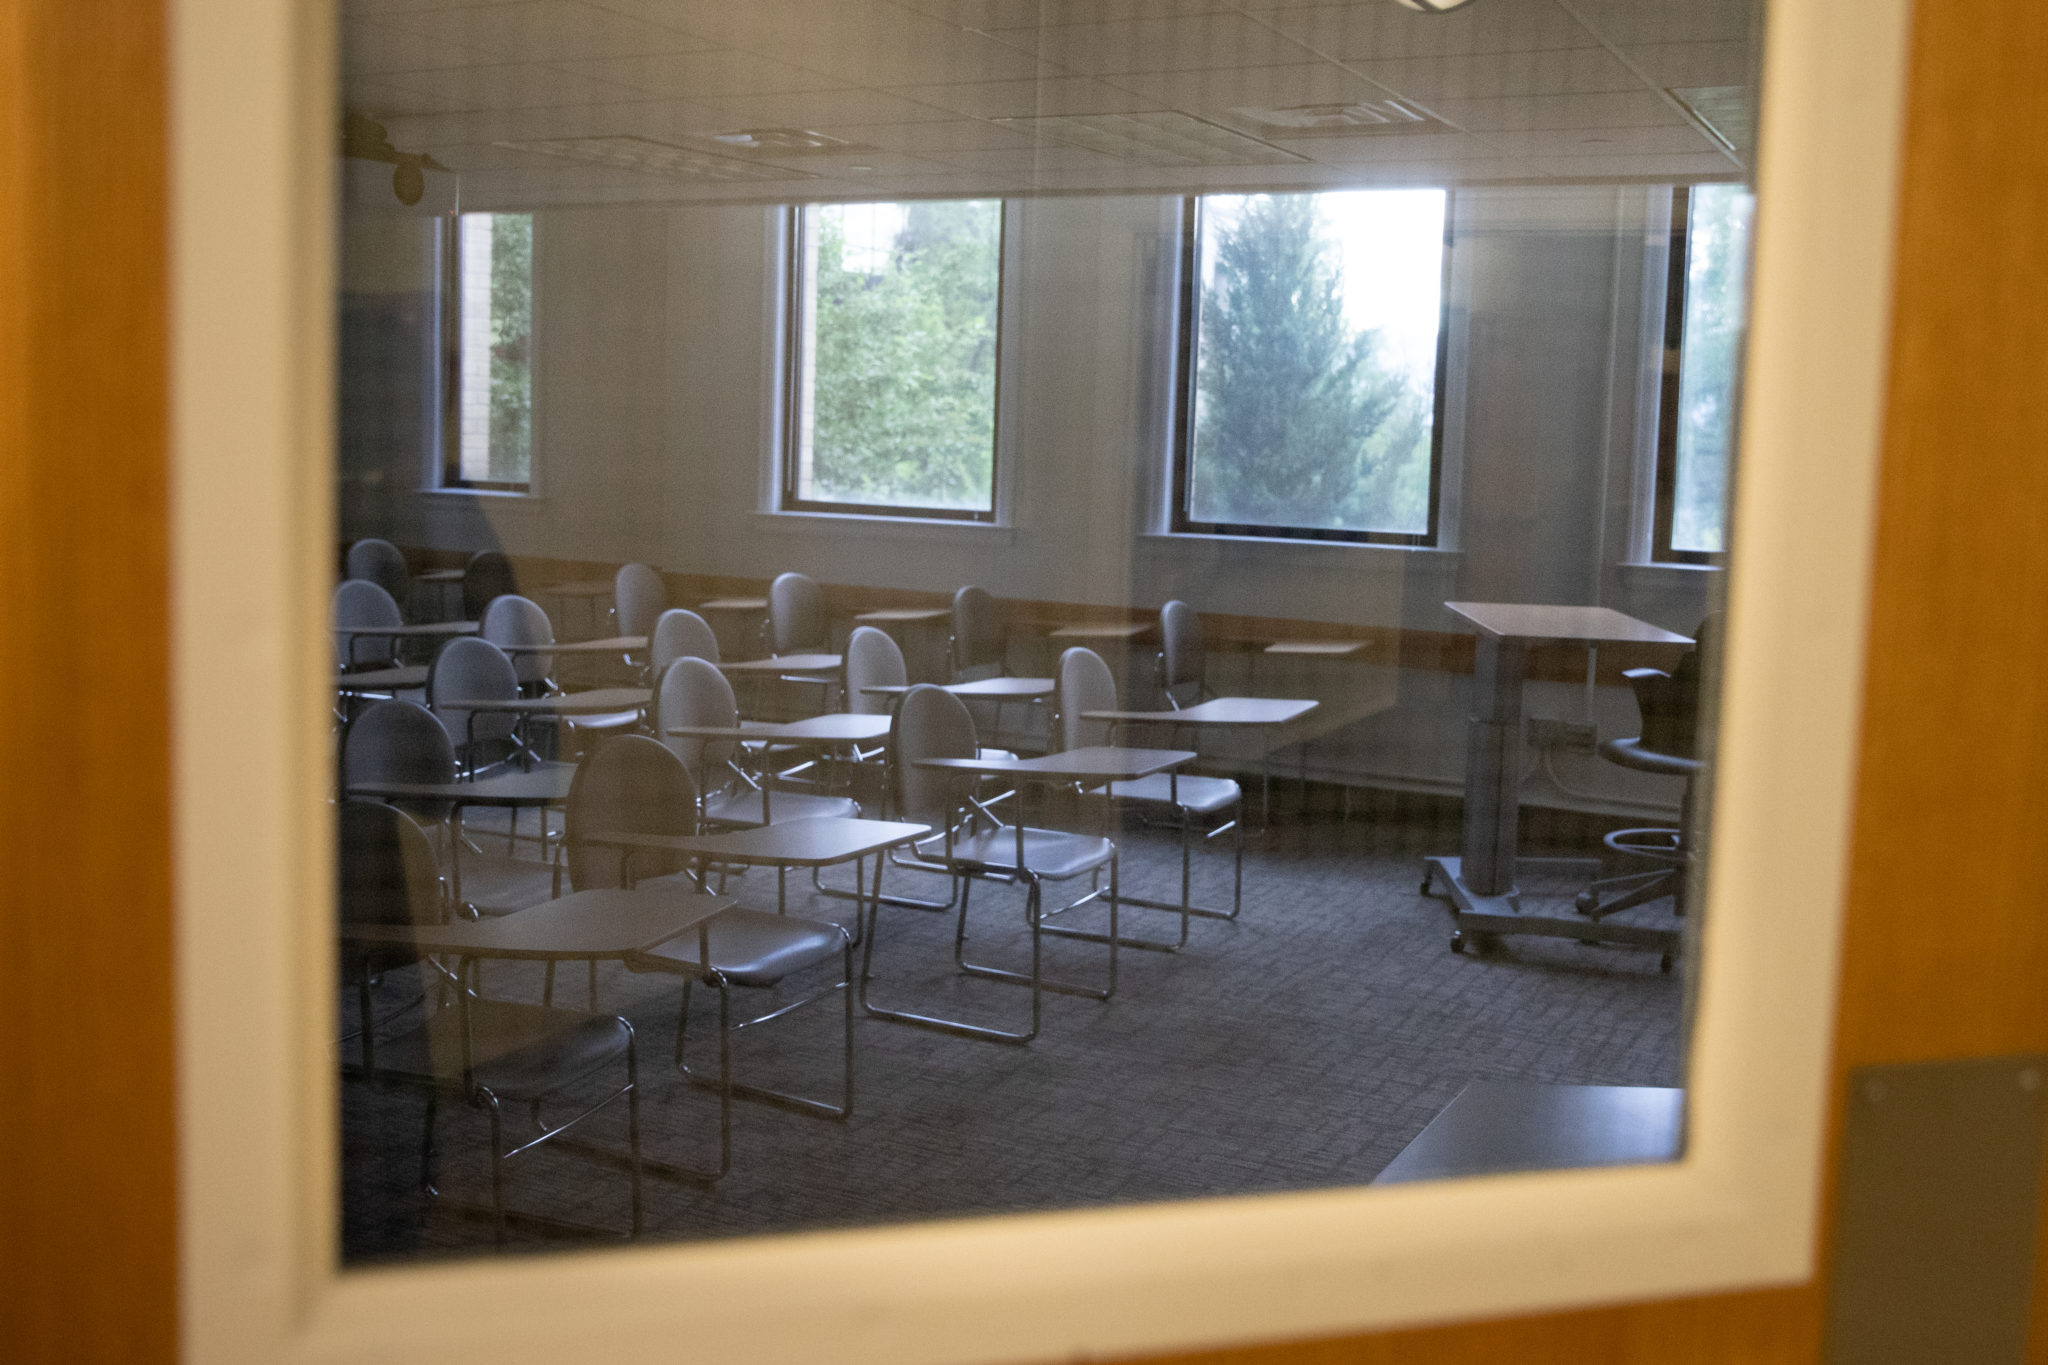 byu-students-split-over-whether-to-enroll-for-fall-semester-if-classes-are-remote-the-daily